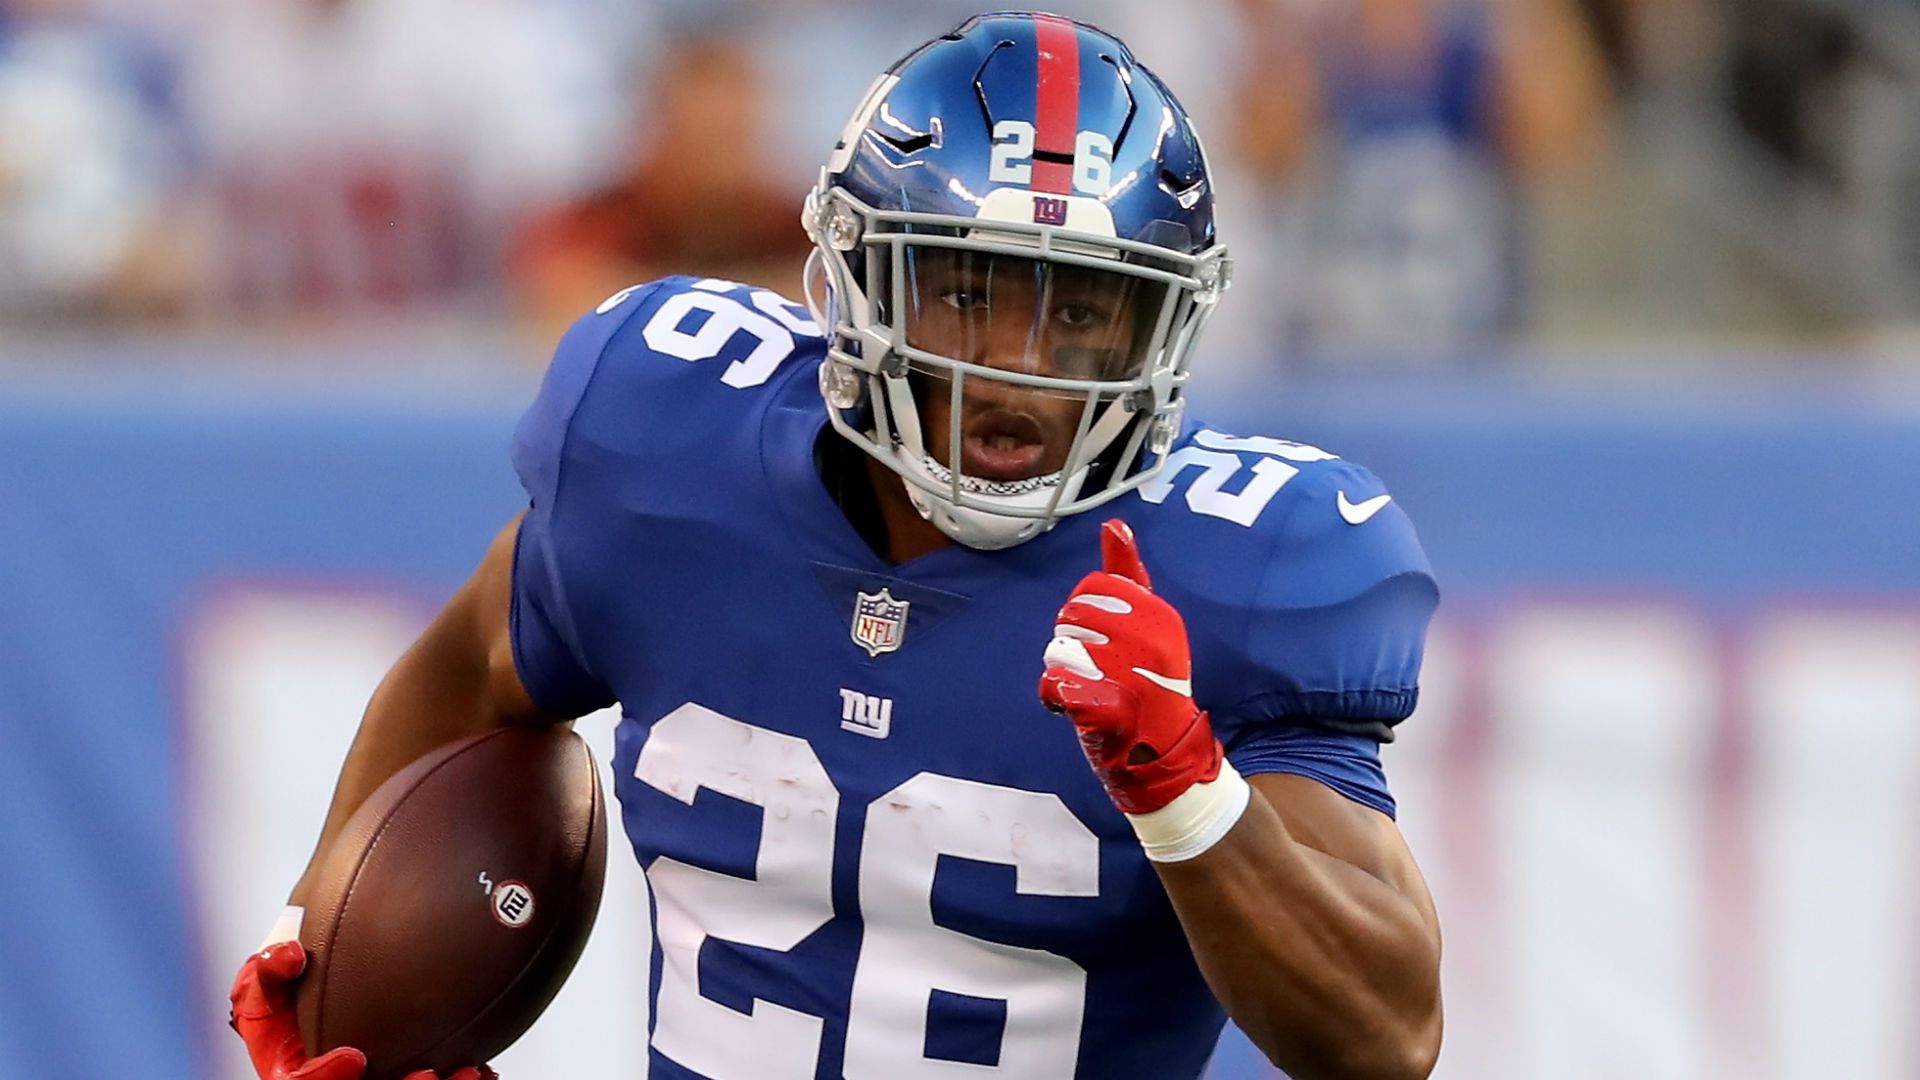 Free download Saquon Barkley has injury scare at Giants practice